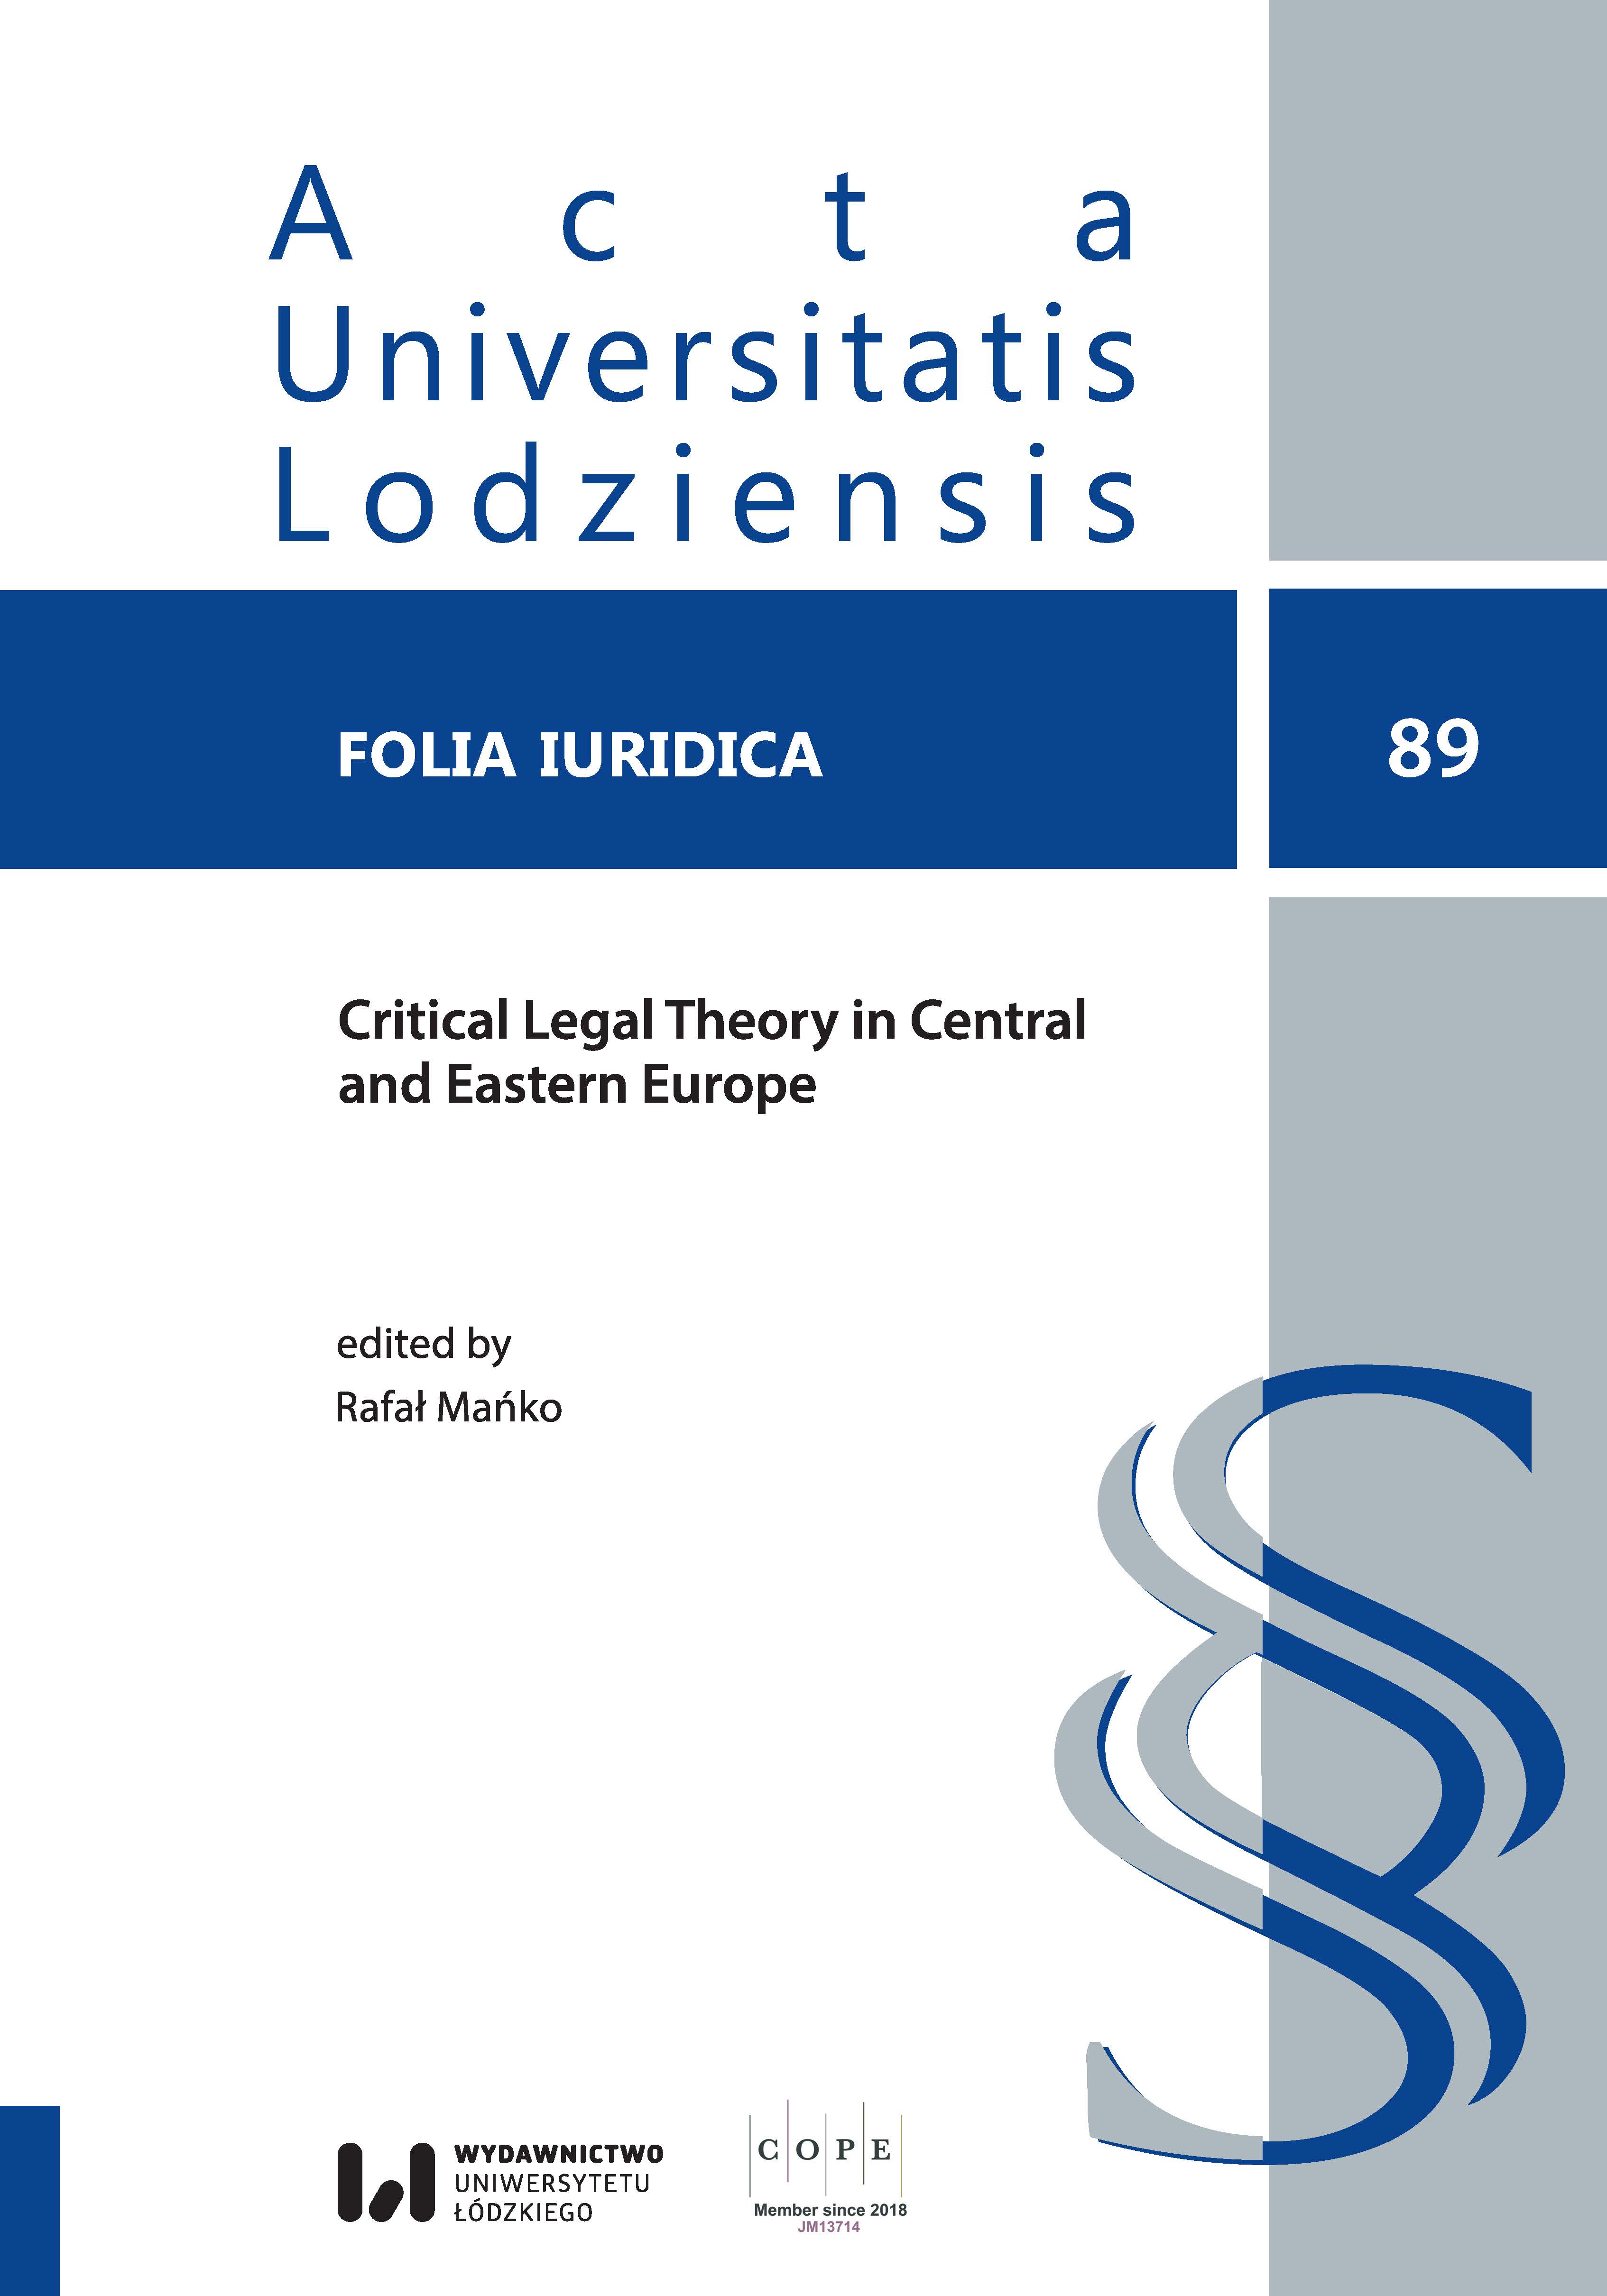 					View Vol. 89 (2019): Critical Legal Theory in Central and Eastern Europe
				